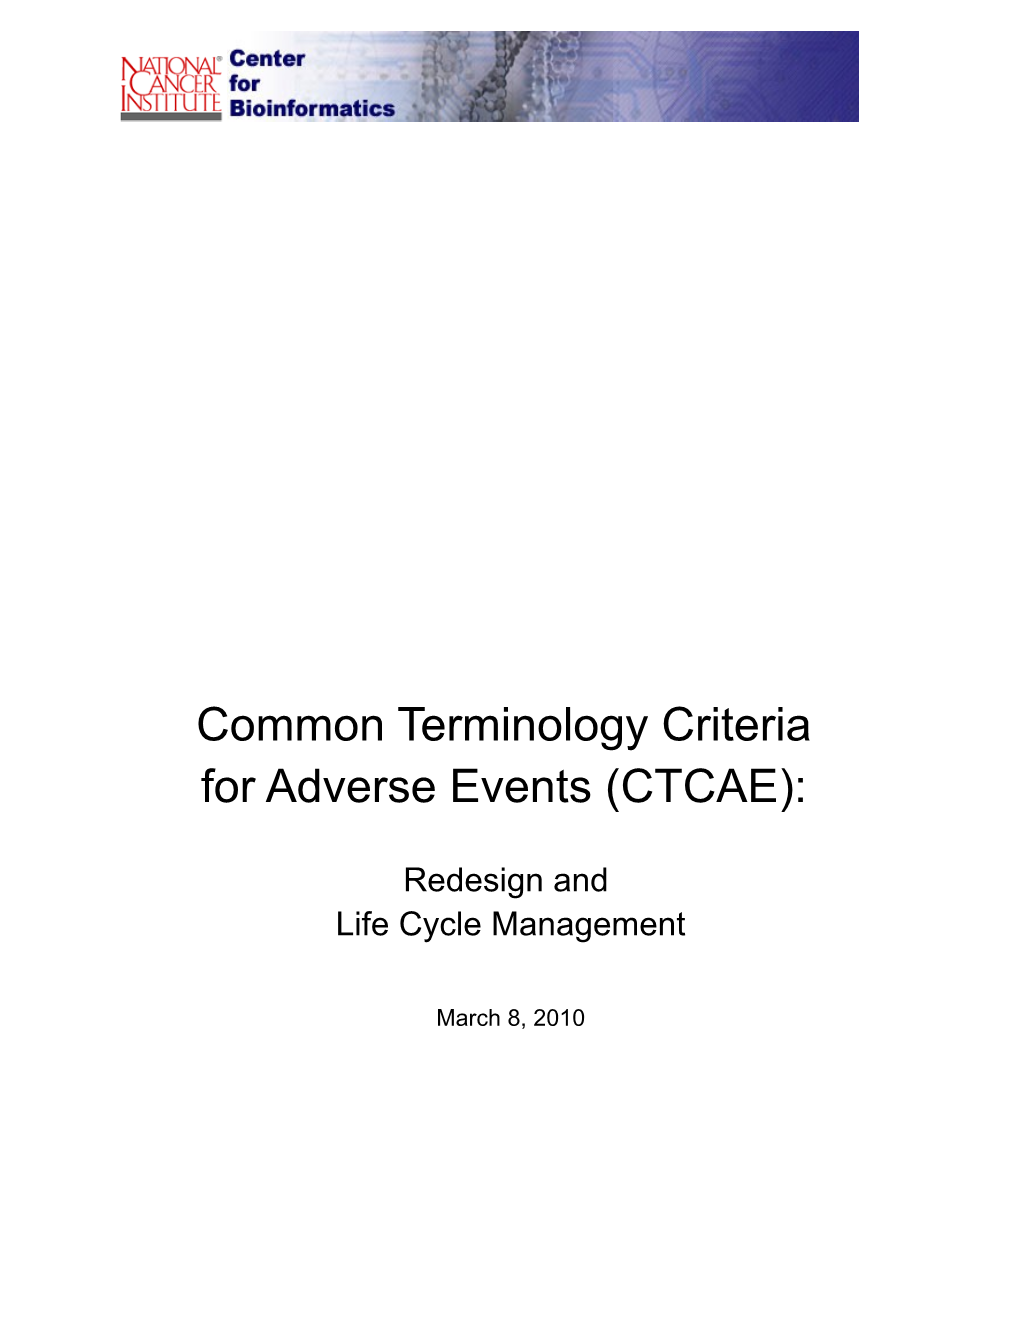 Common Terminology Criteria for Adverse Events (CTCAE)